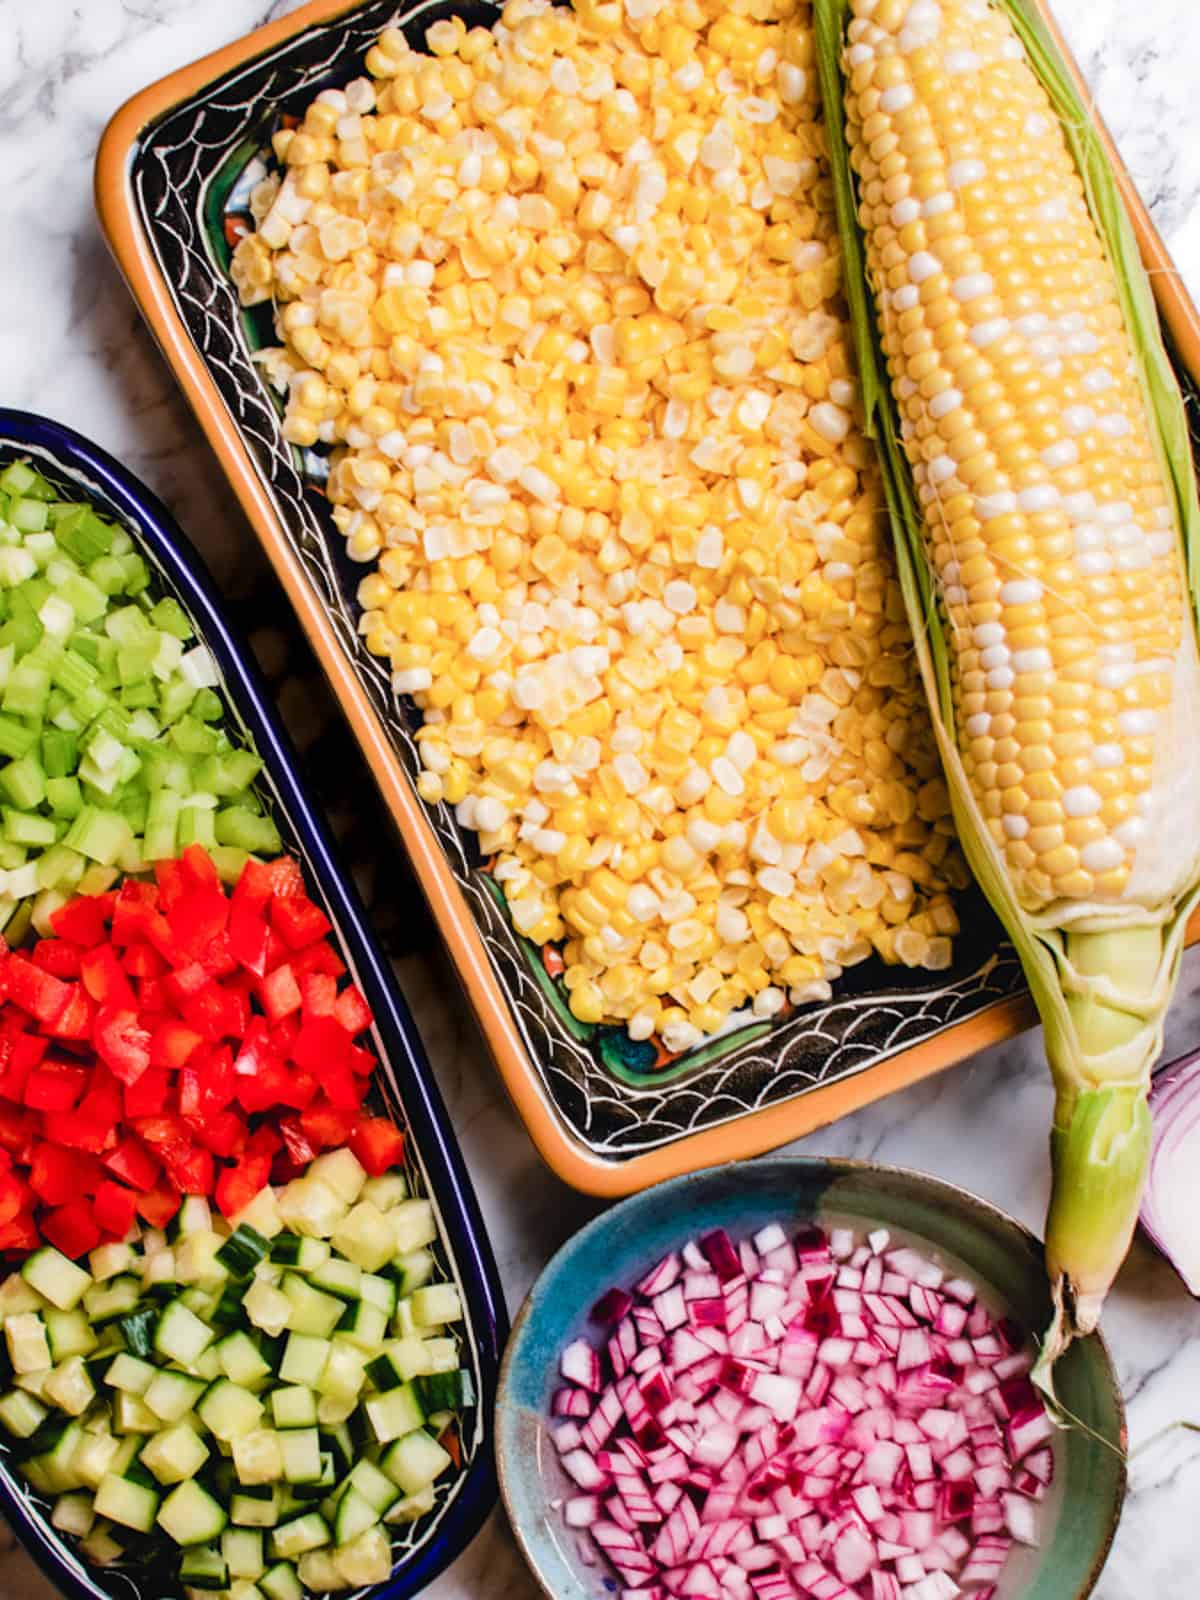 Prepared vegetables for corn salad plus one whole ear of corn.